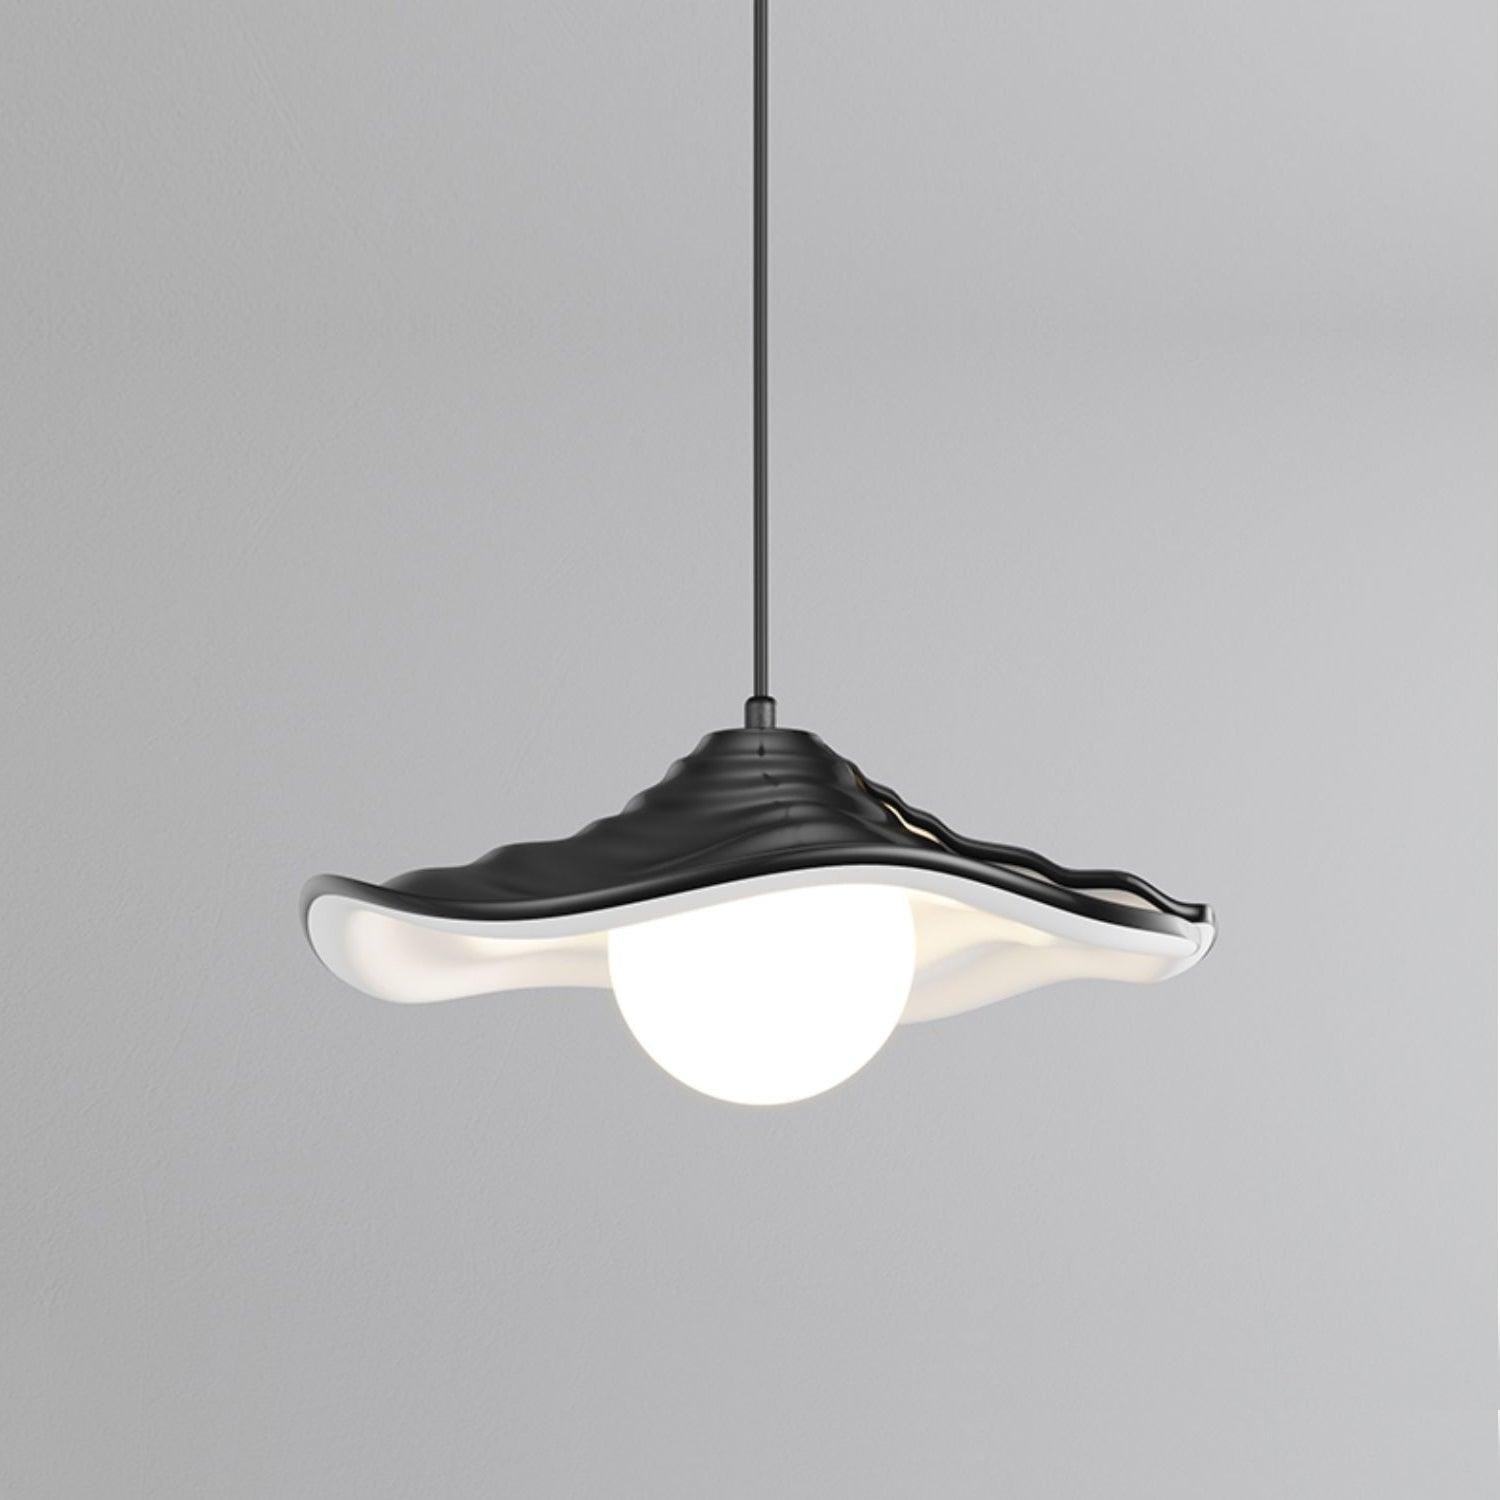 Black Hat Pendant Light, measuring 11.8" in diameter and 5.9" in height (or 30cm x 15cm), with a cool light feature.